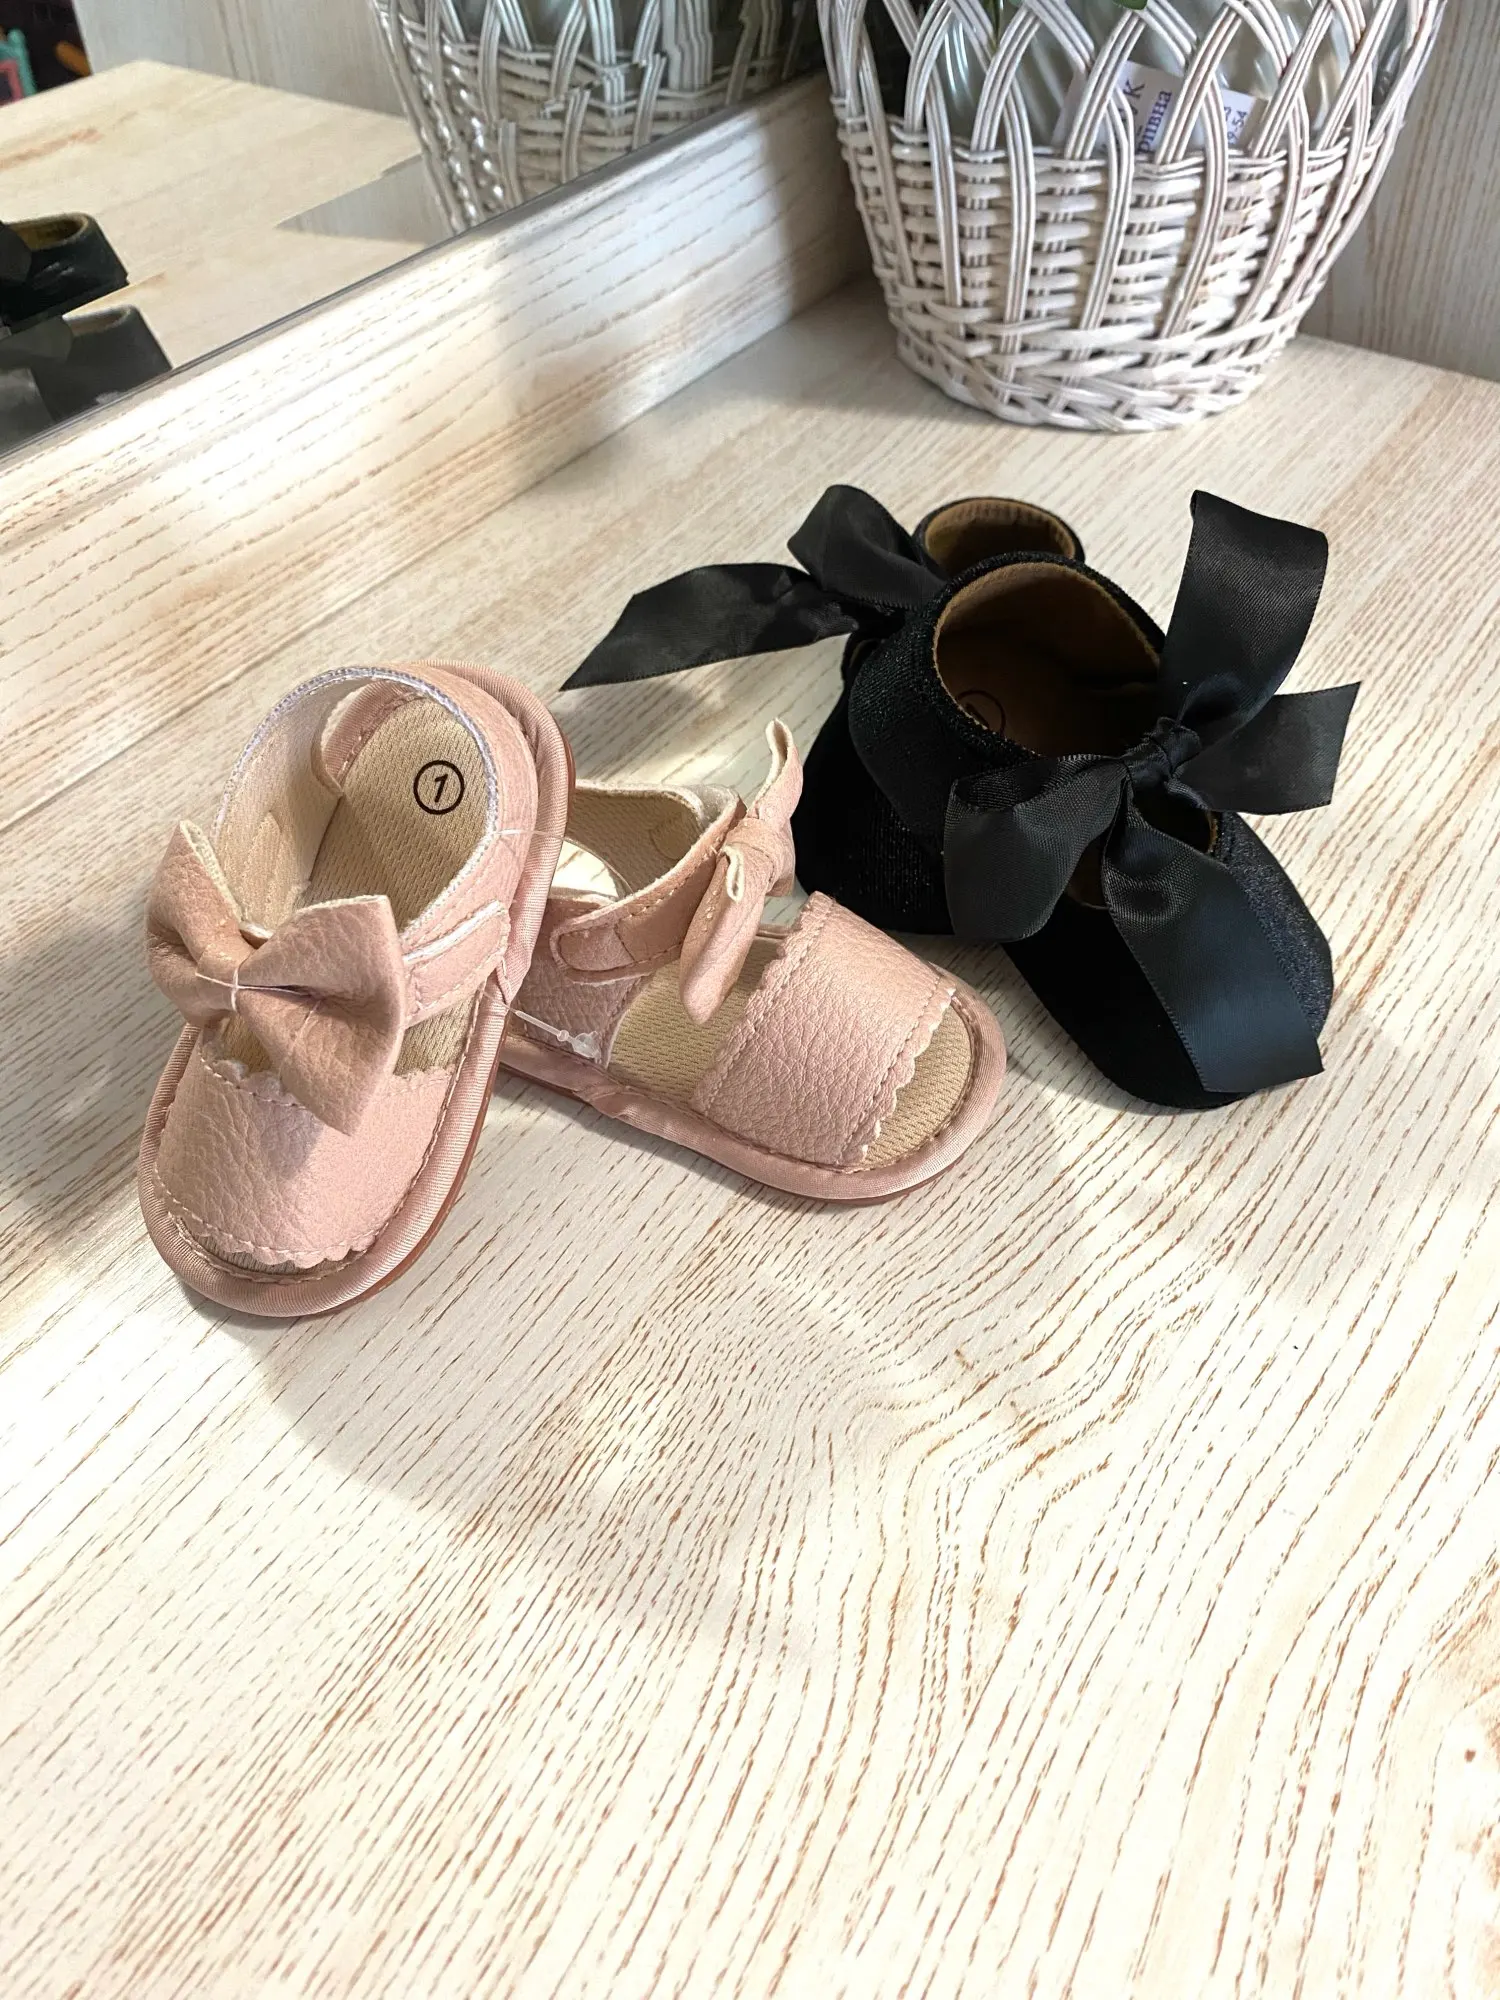 Baby Shoes Summer Baby Boy Girl Shoes Toddler Flats Sandals Soft Rubber Sole Anti-Slip Bowknot Crib First Walker Shoes photo review